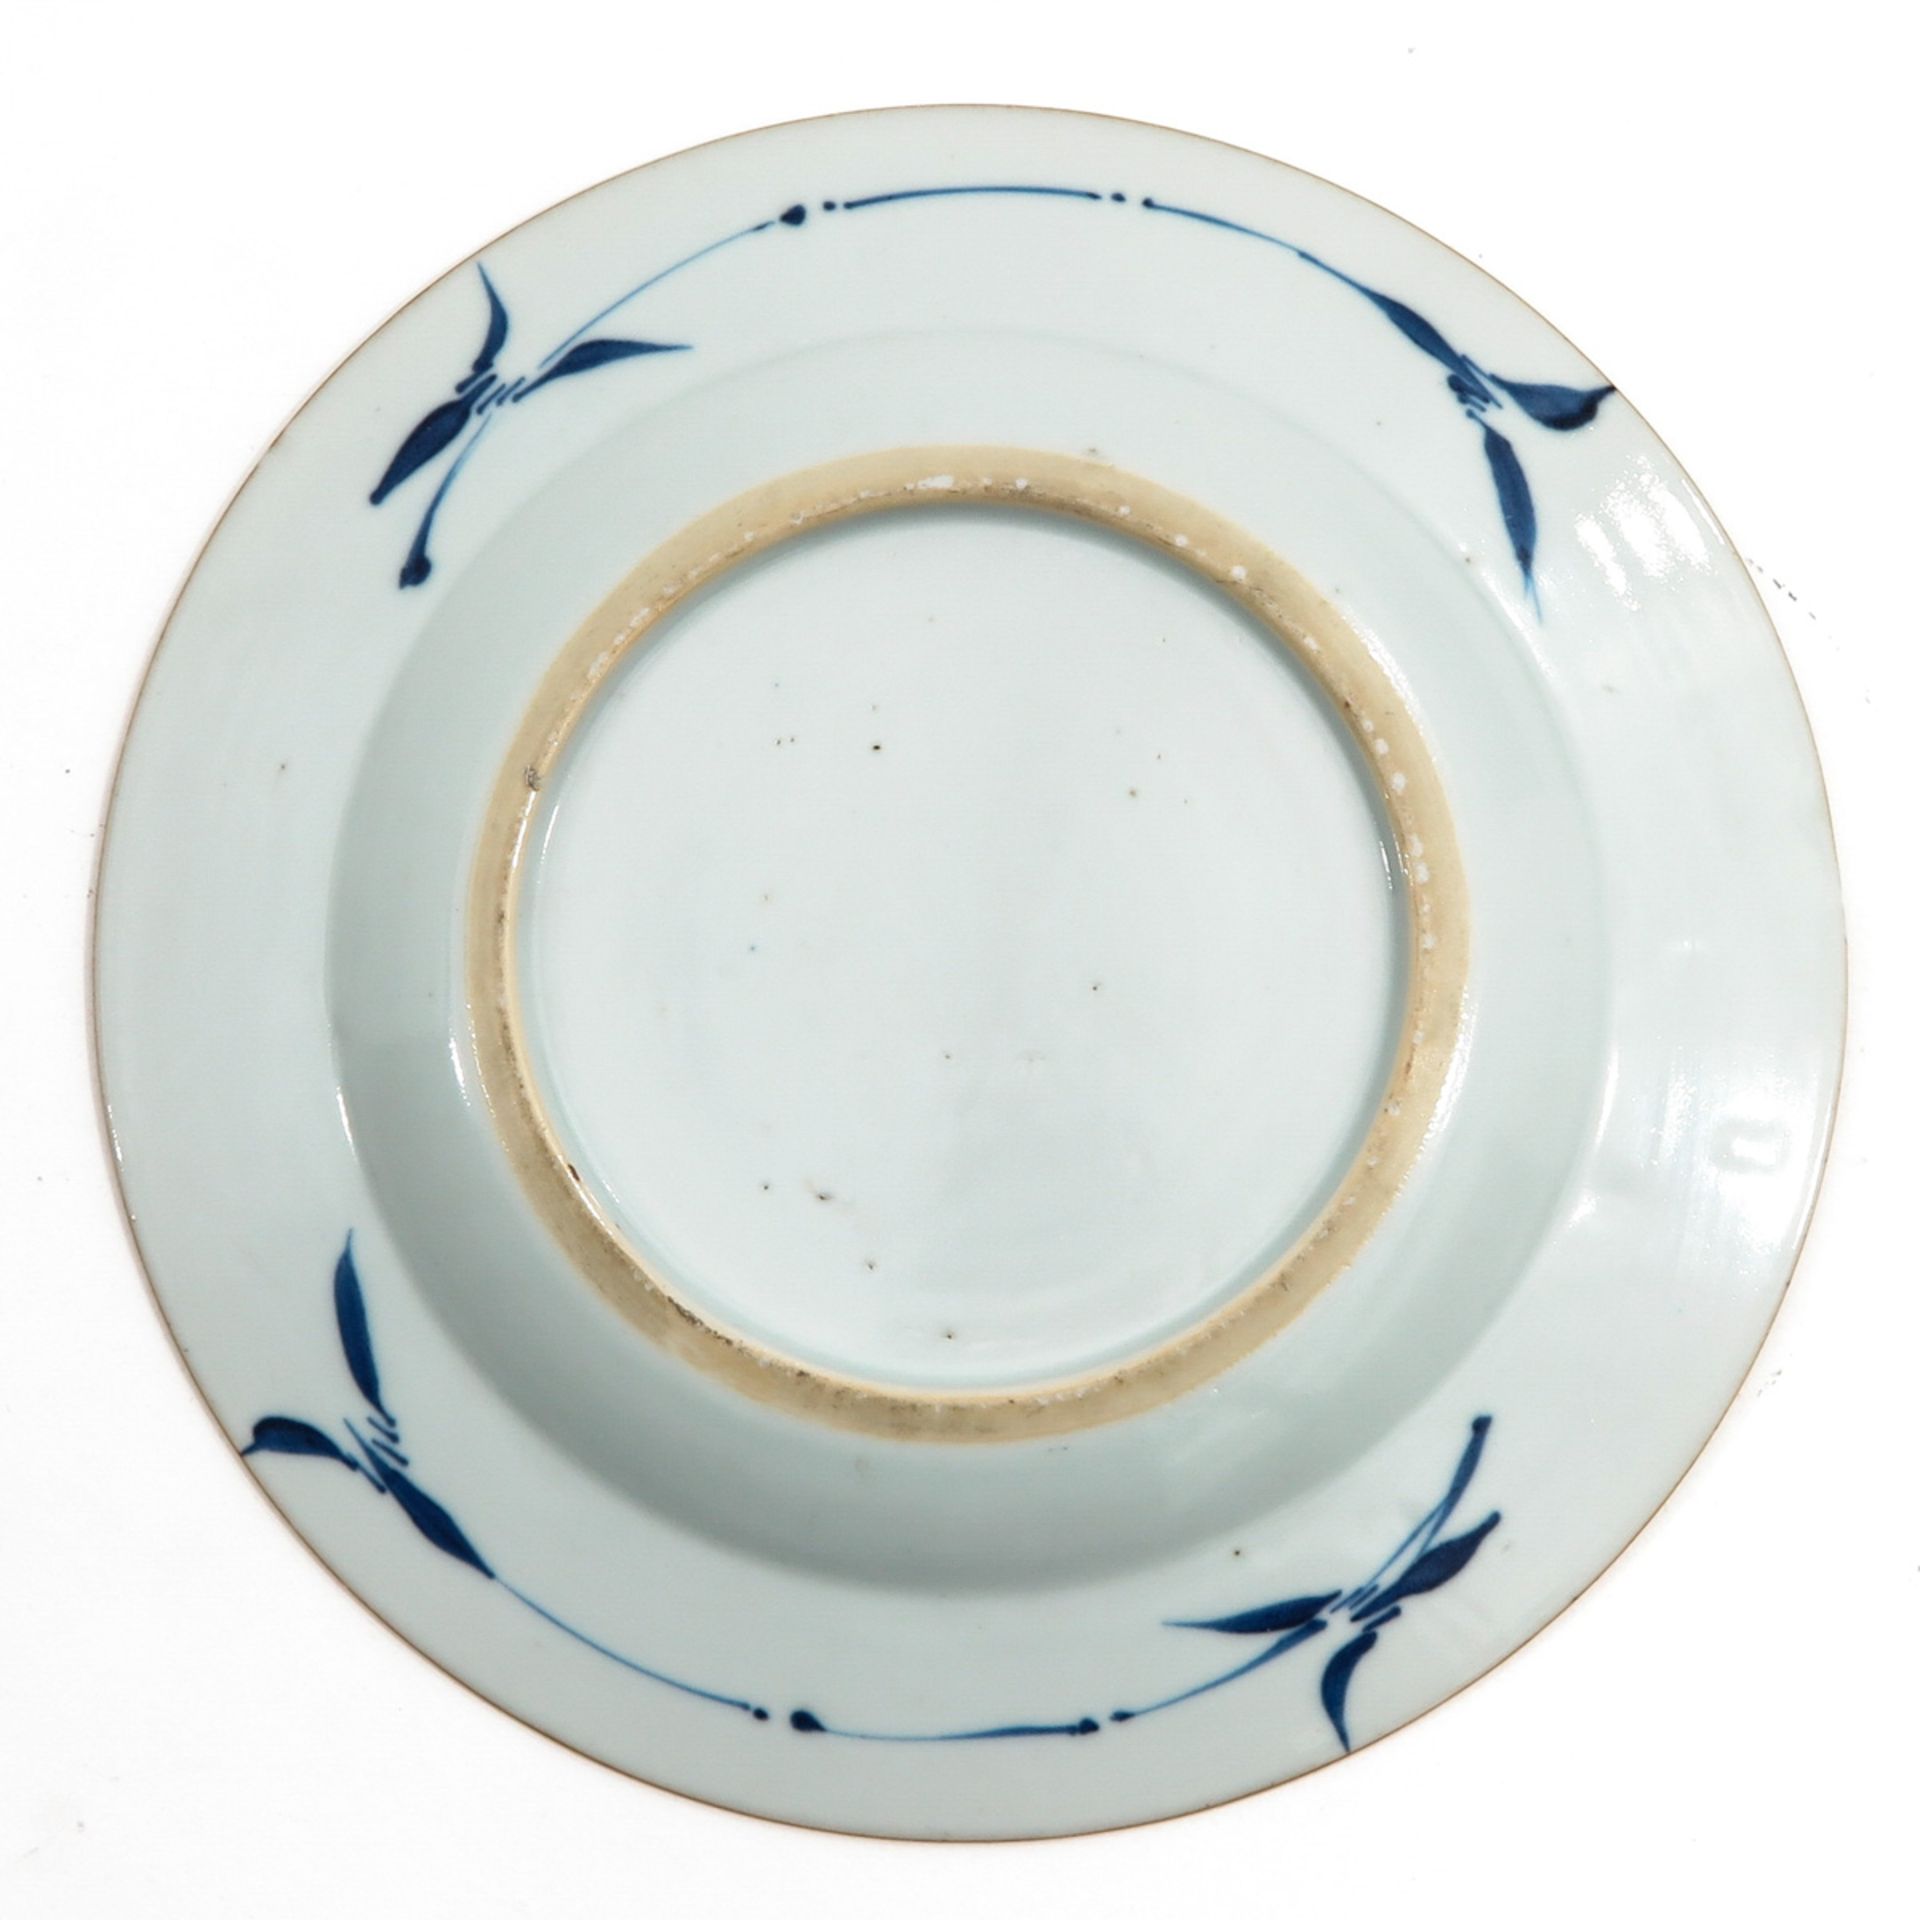 A Series of 3 Blue and White Plates - Bild 8 aus 10